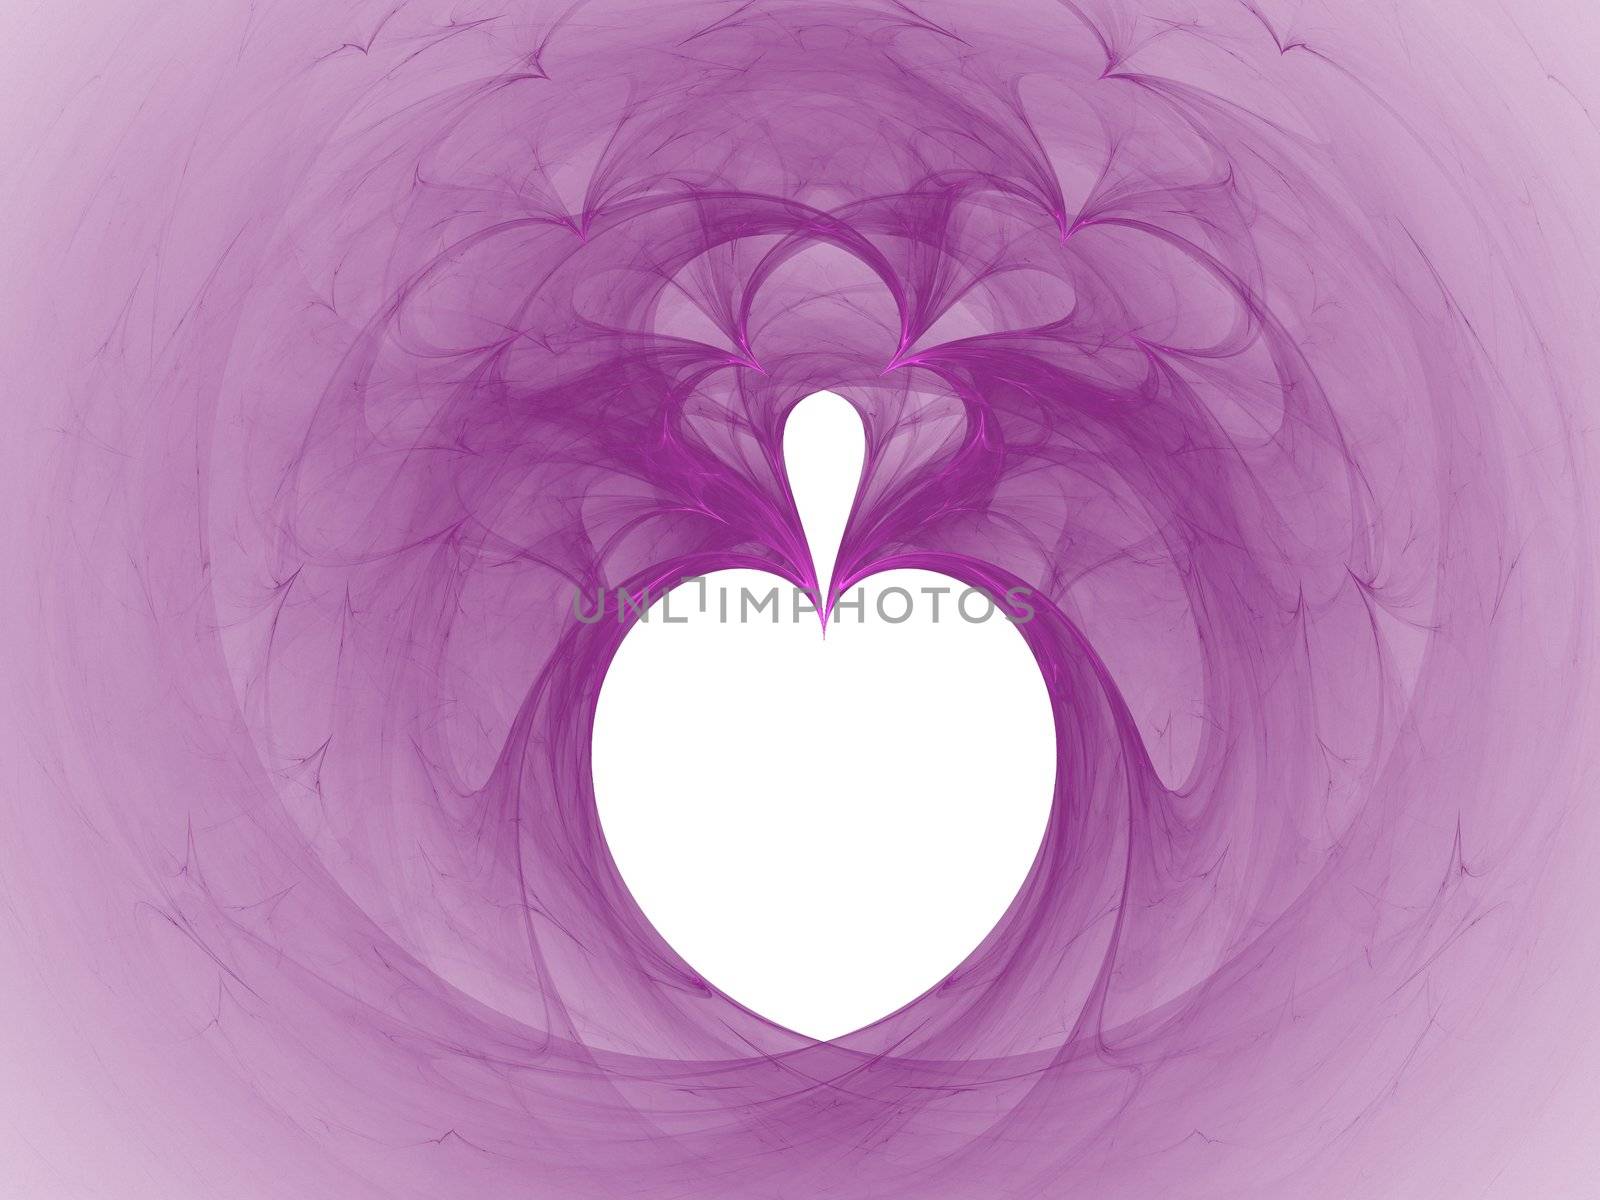 high res flame fractal forming a heart with center drop in hollyhock color